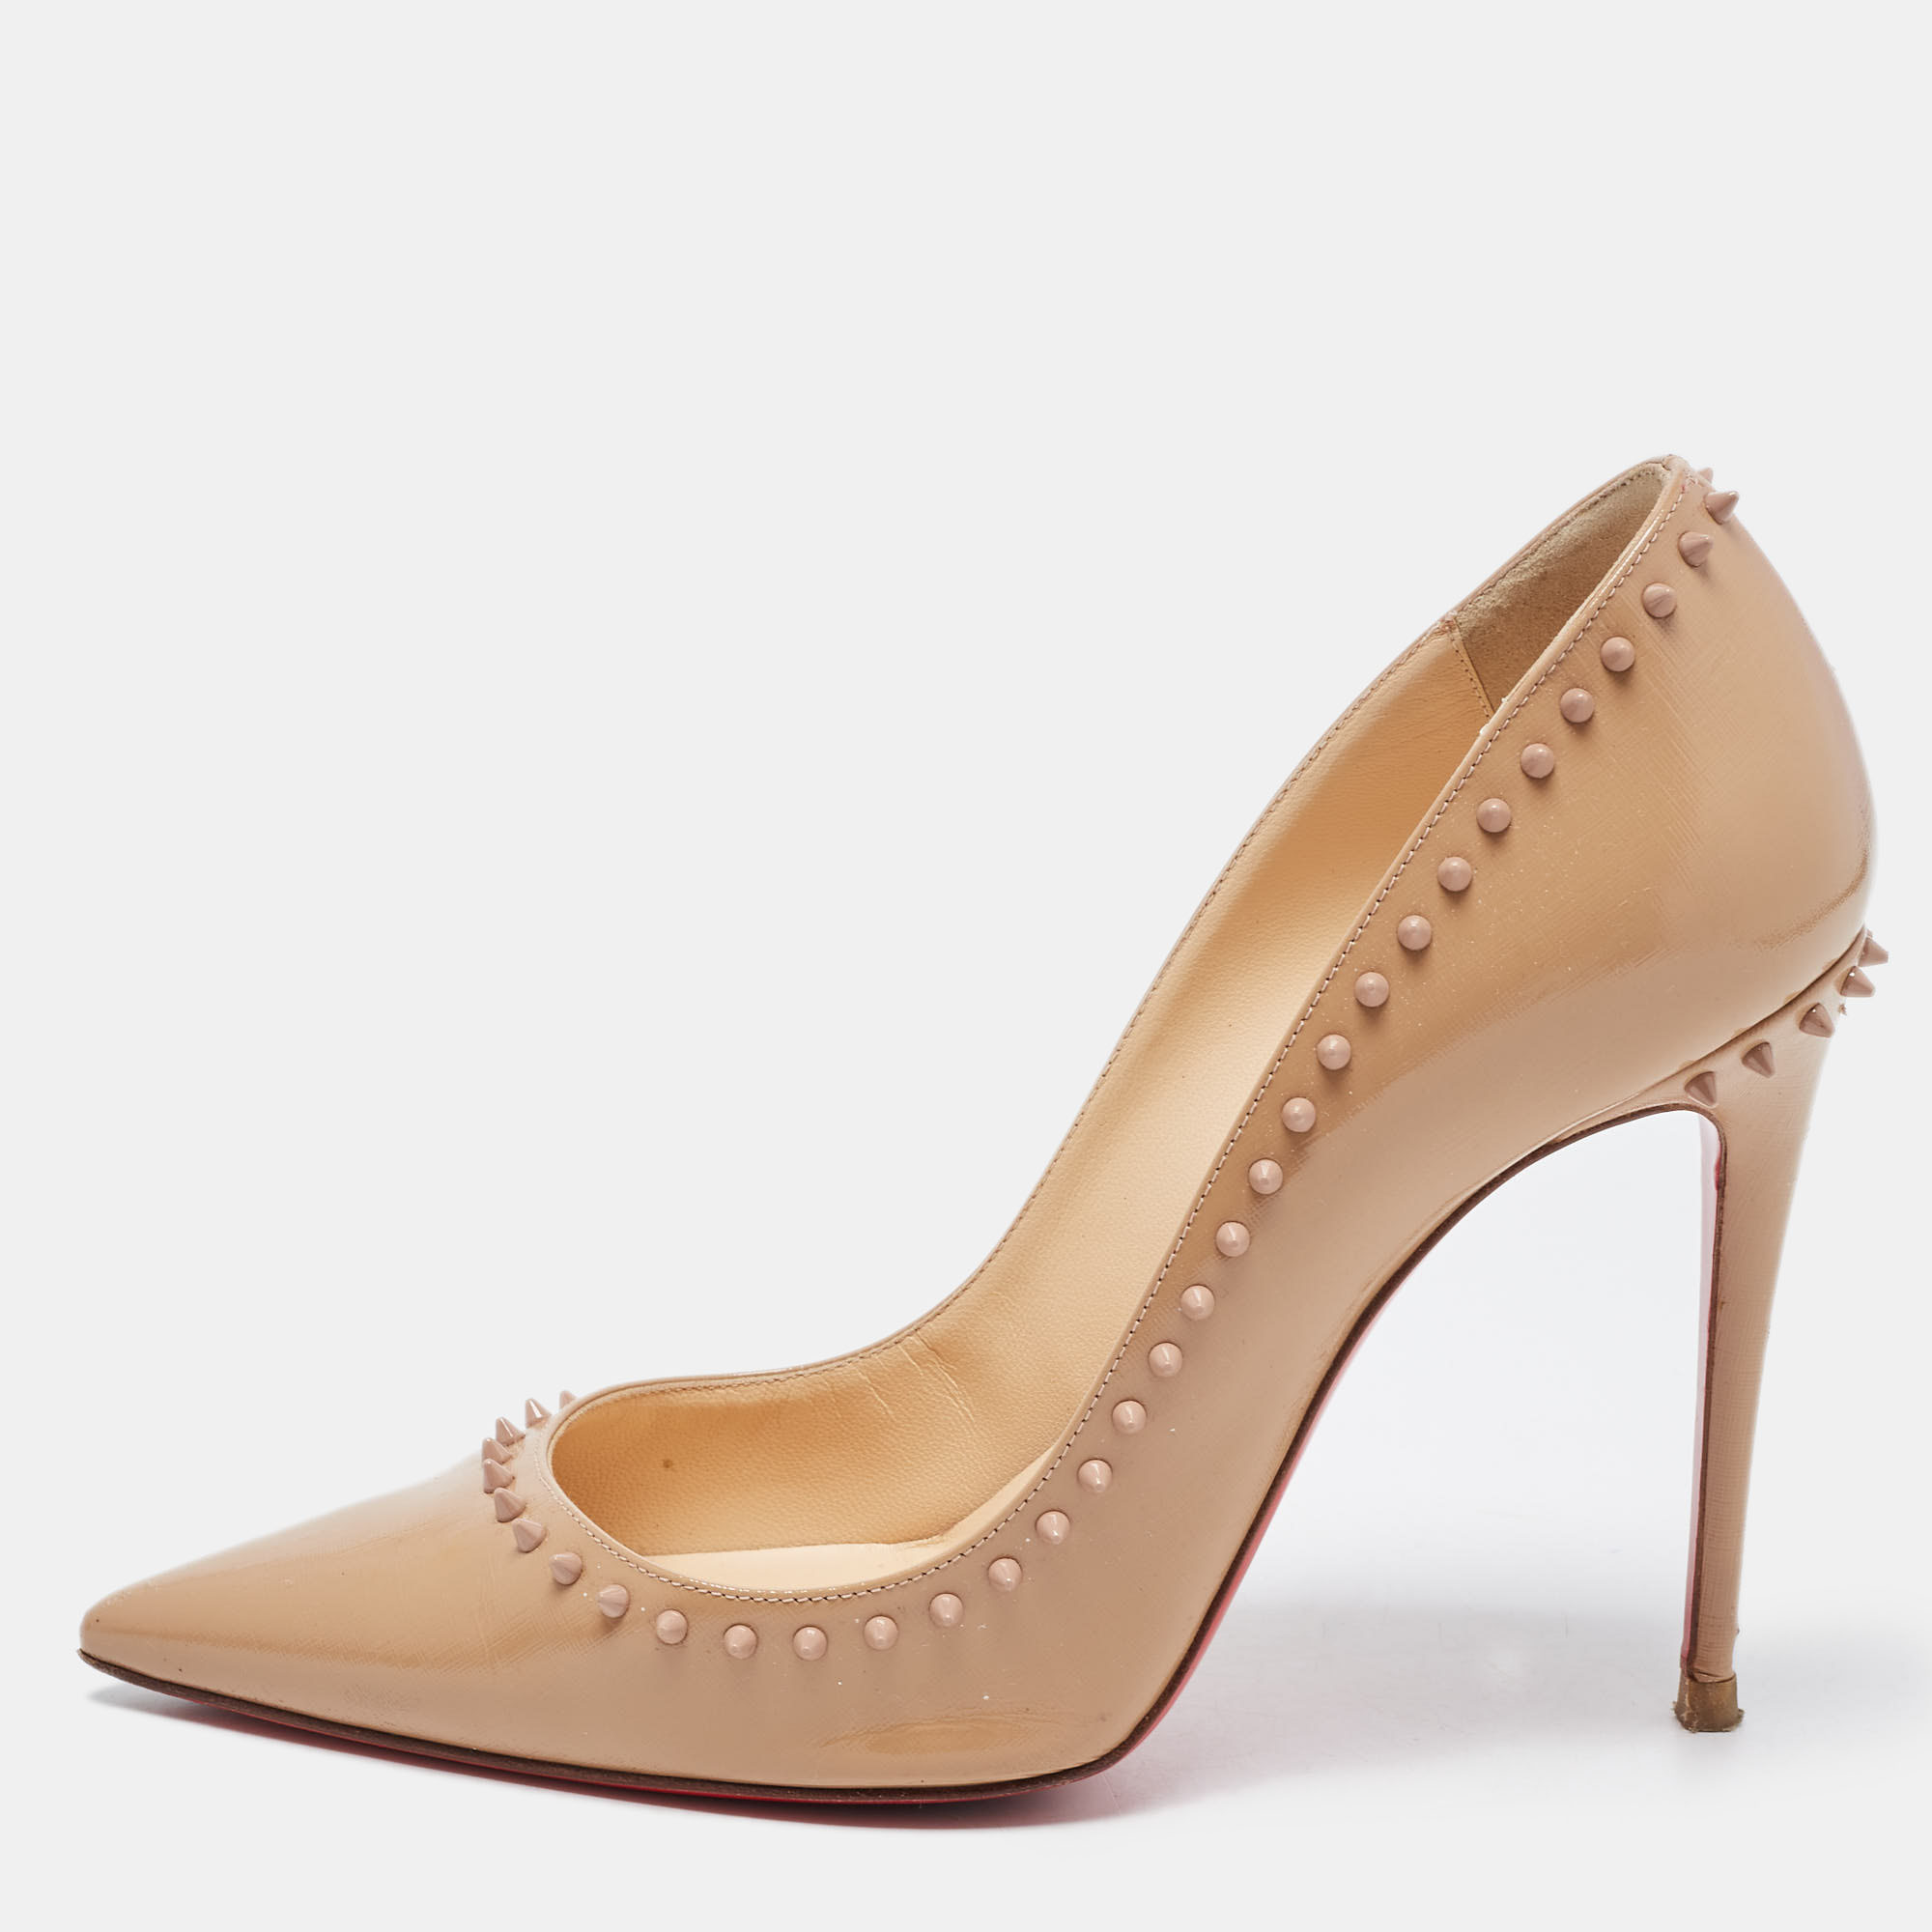 

Christian Louboutin Beige Patent Leather Anjalina Spike Pointed Toe Pumps Size